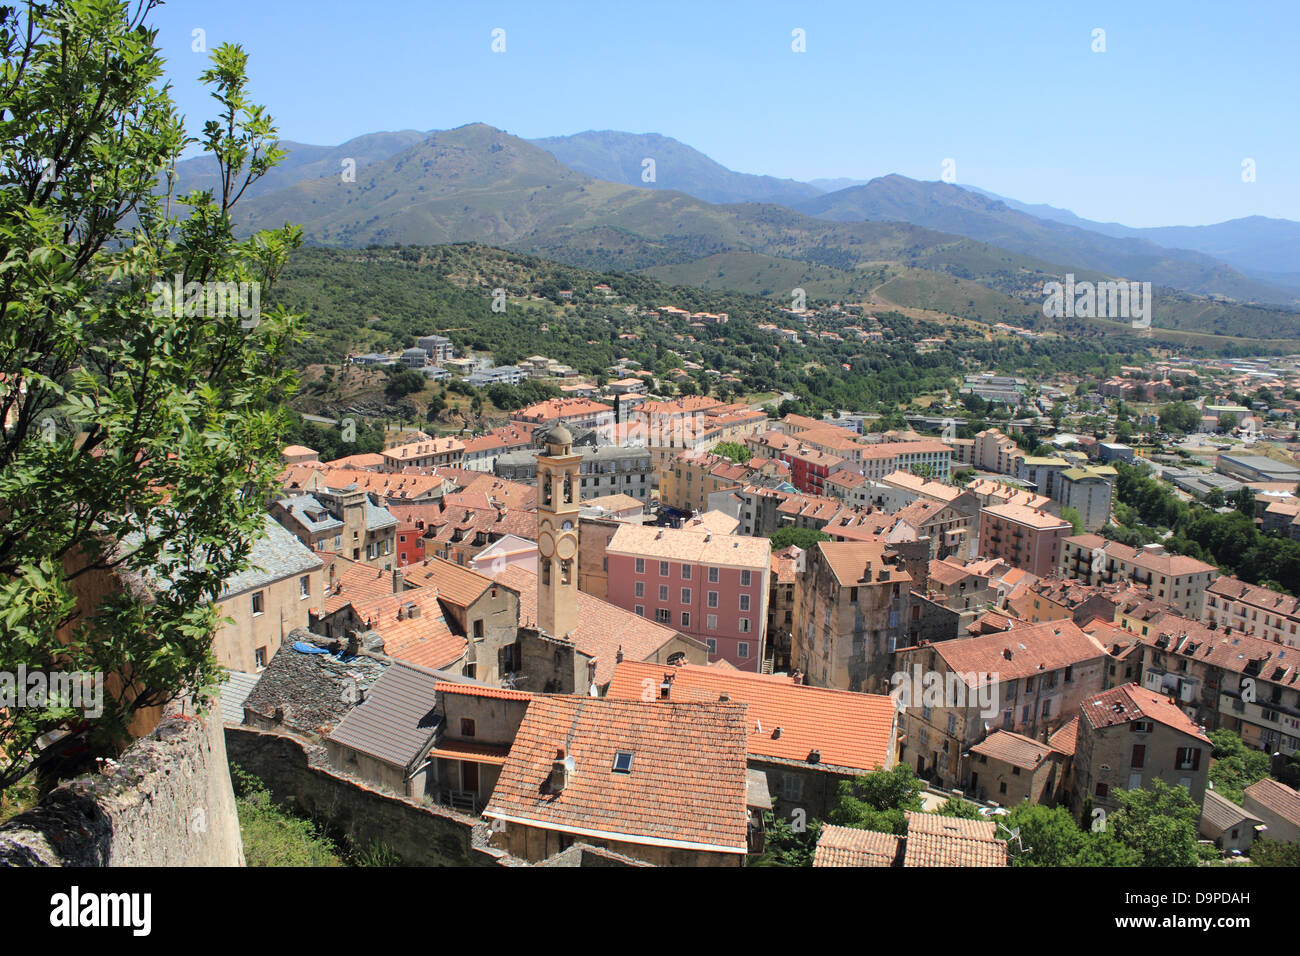 Old town of Corte, Corsica, France Stock Photo